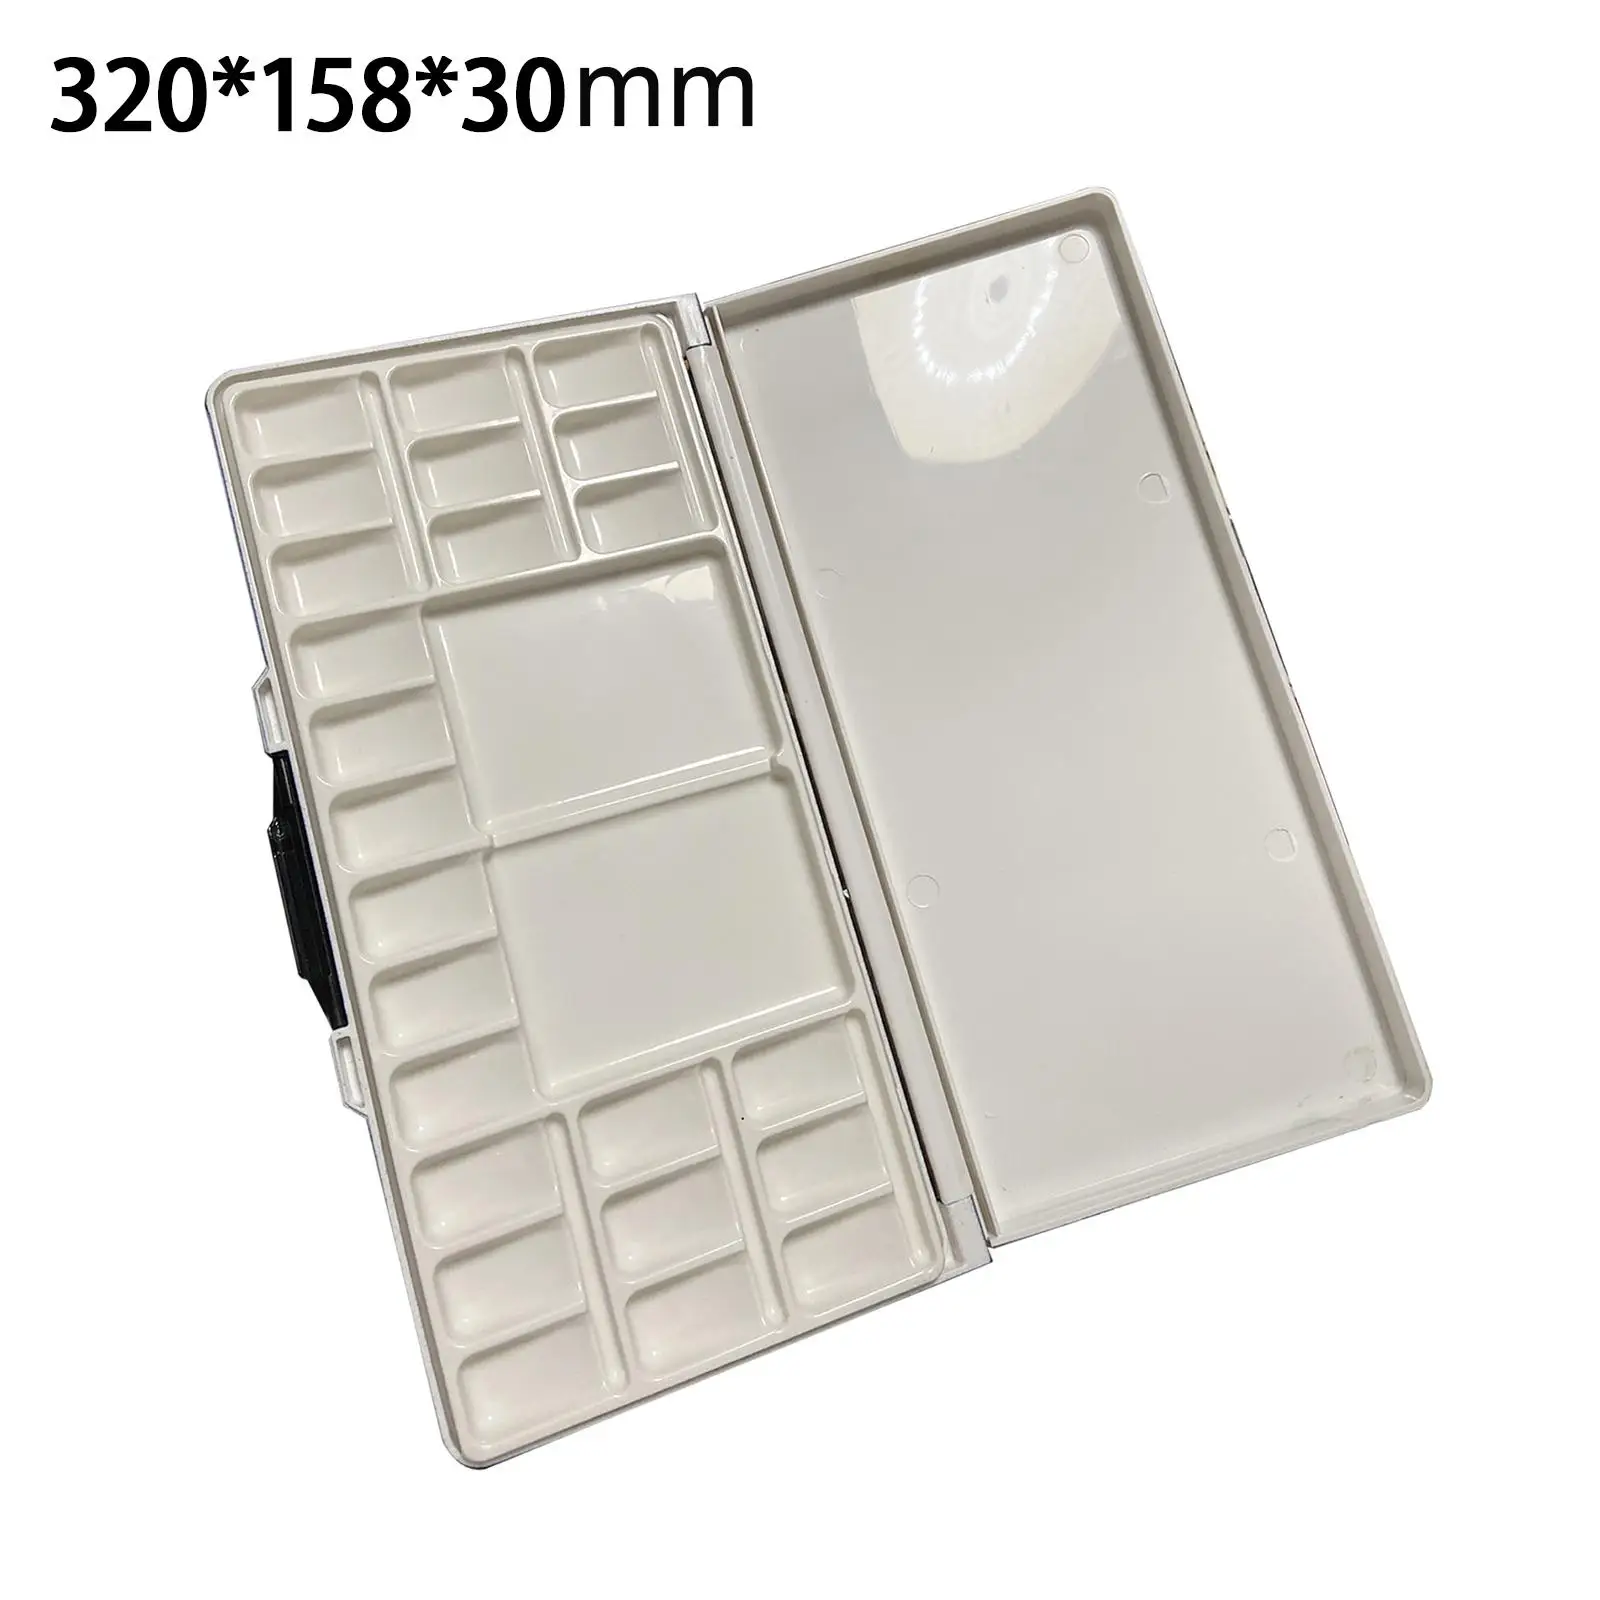 Watercolor Palette Paint Case Supplies Adult with Lid Large Capacity Tray Paint Palette for Acrylic Painting Beginners Painters